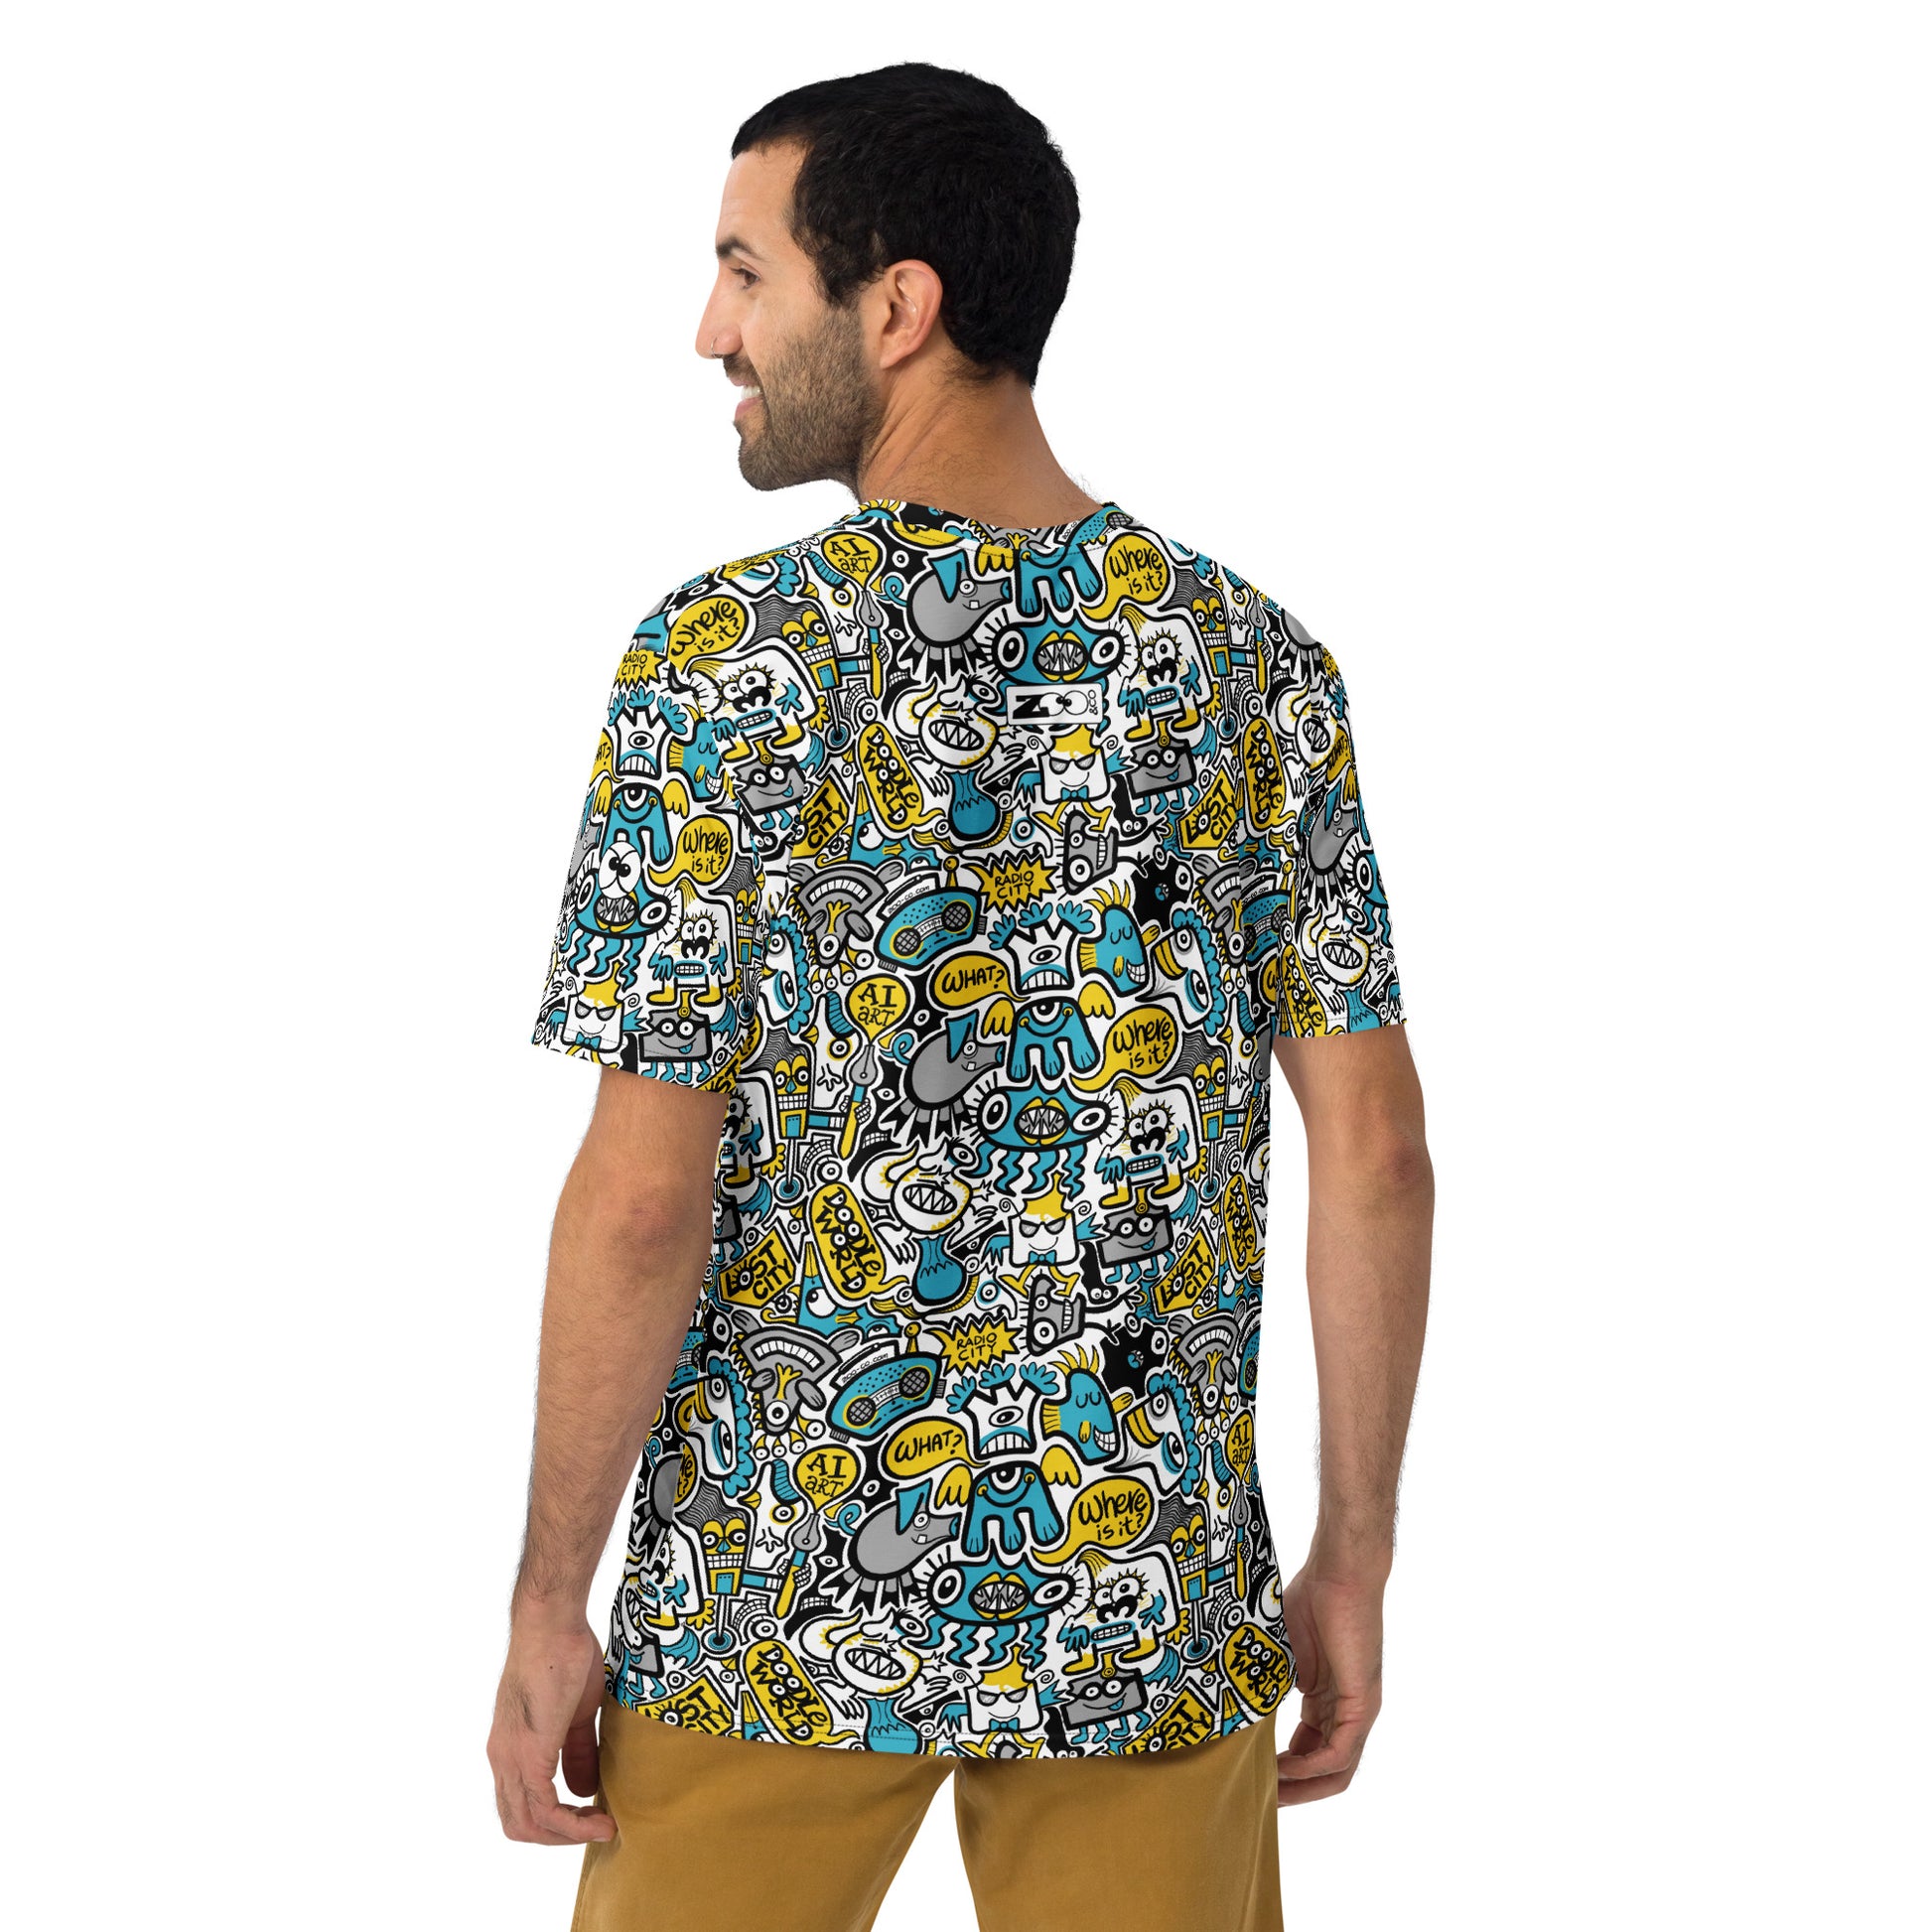 Discover a whole Doodle world in Lost city All-over print Men's t-shirt. Back view